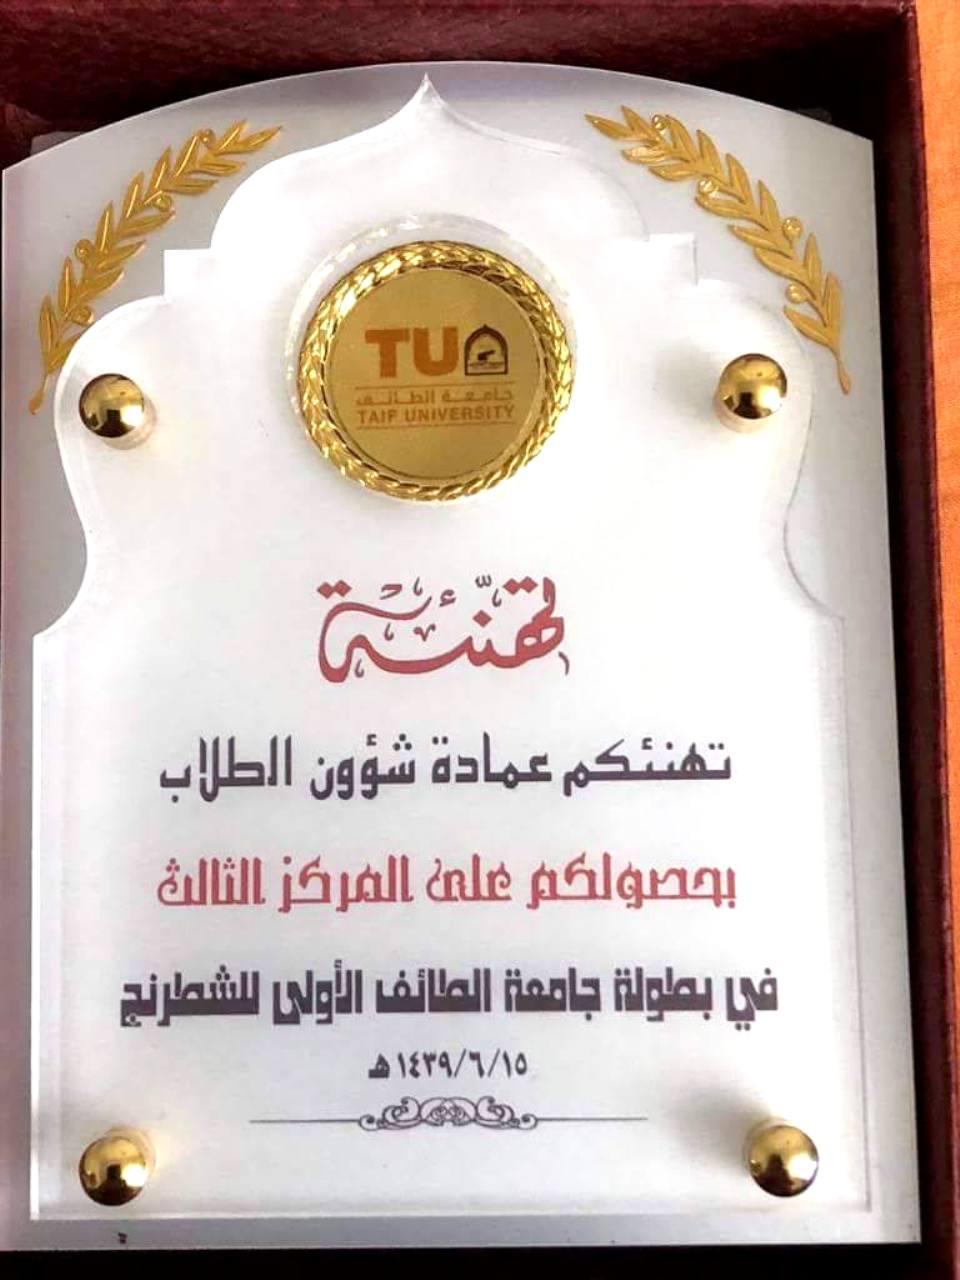 The Community College won the third place in the first Taif University Chess Championship